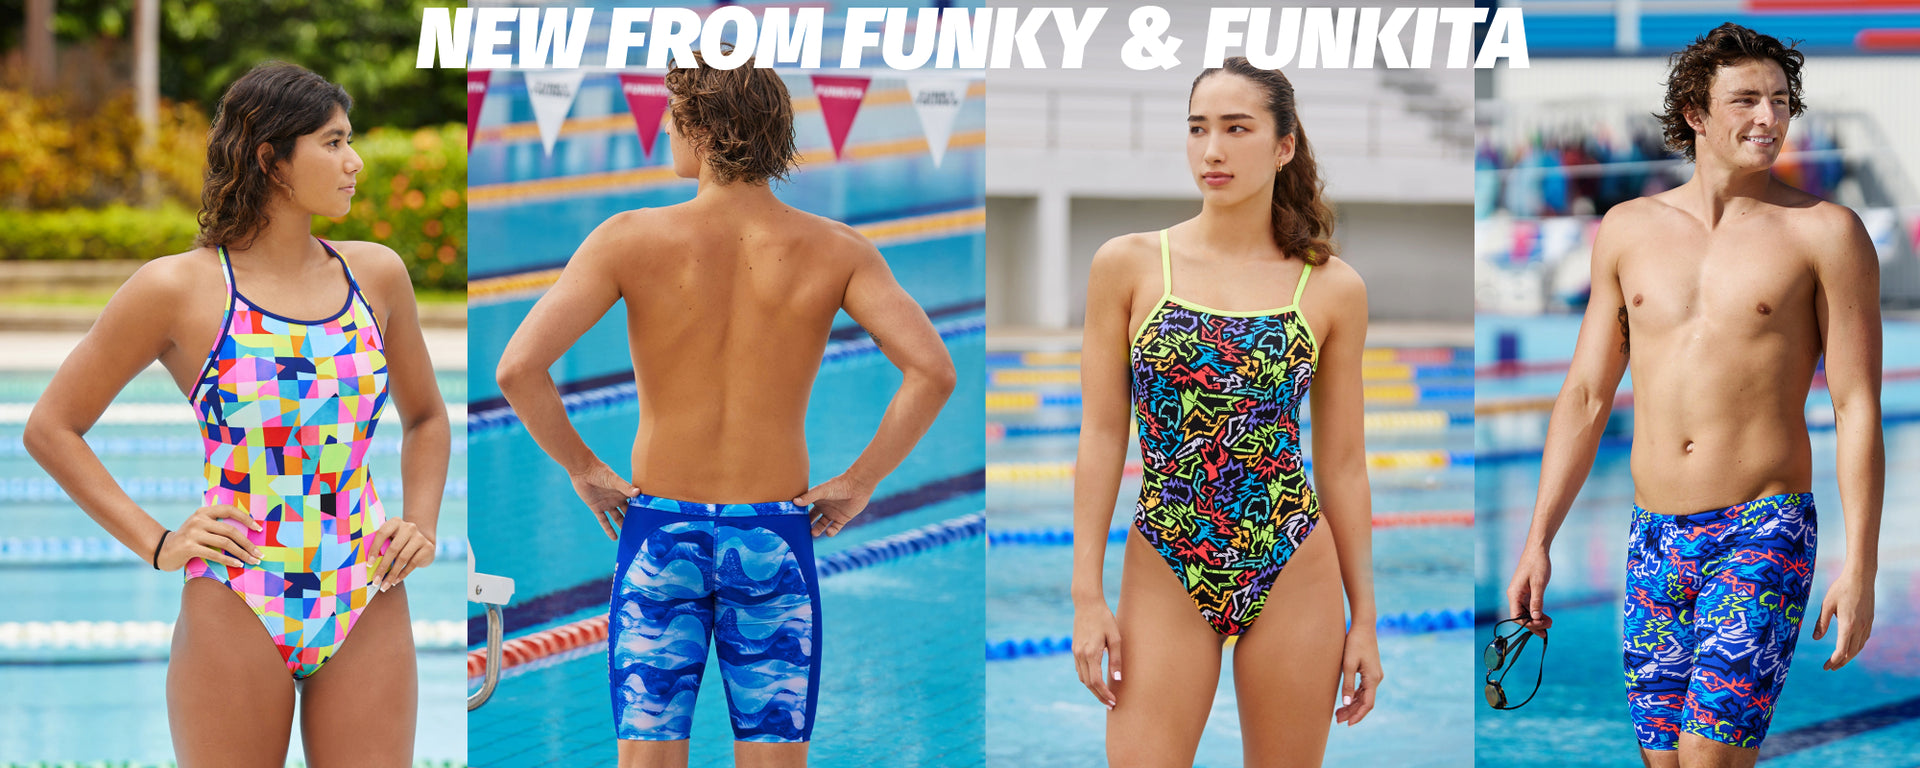 New products from Funky and Funkita